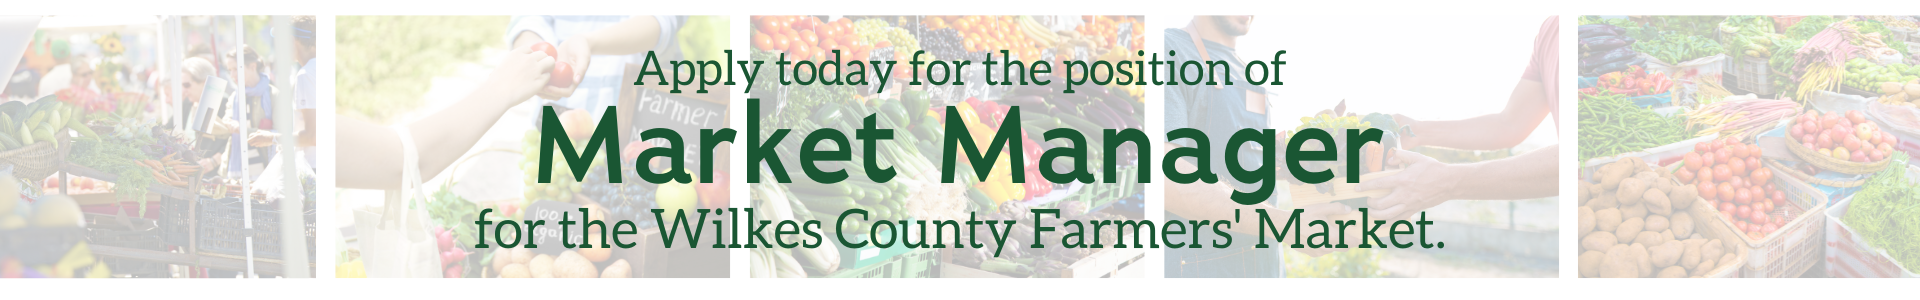 wcfm farmers market manager apply today banner downtown north wilkesboro